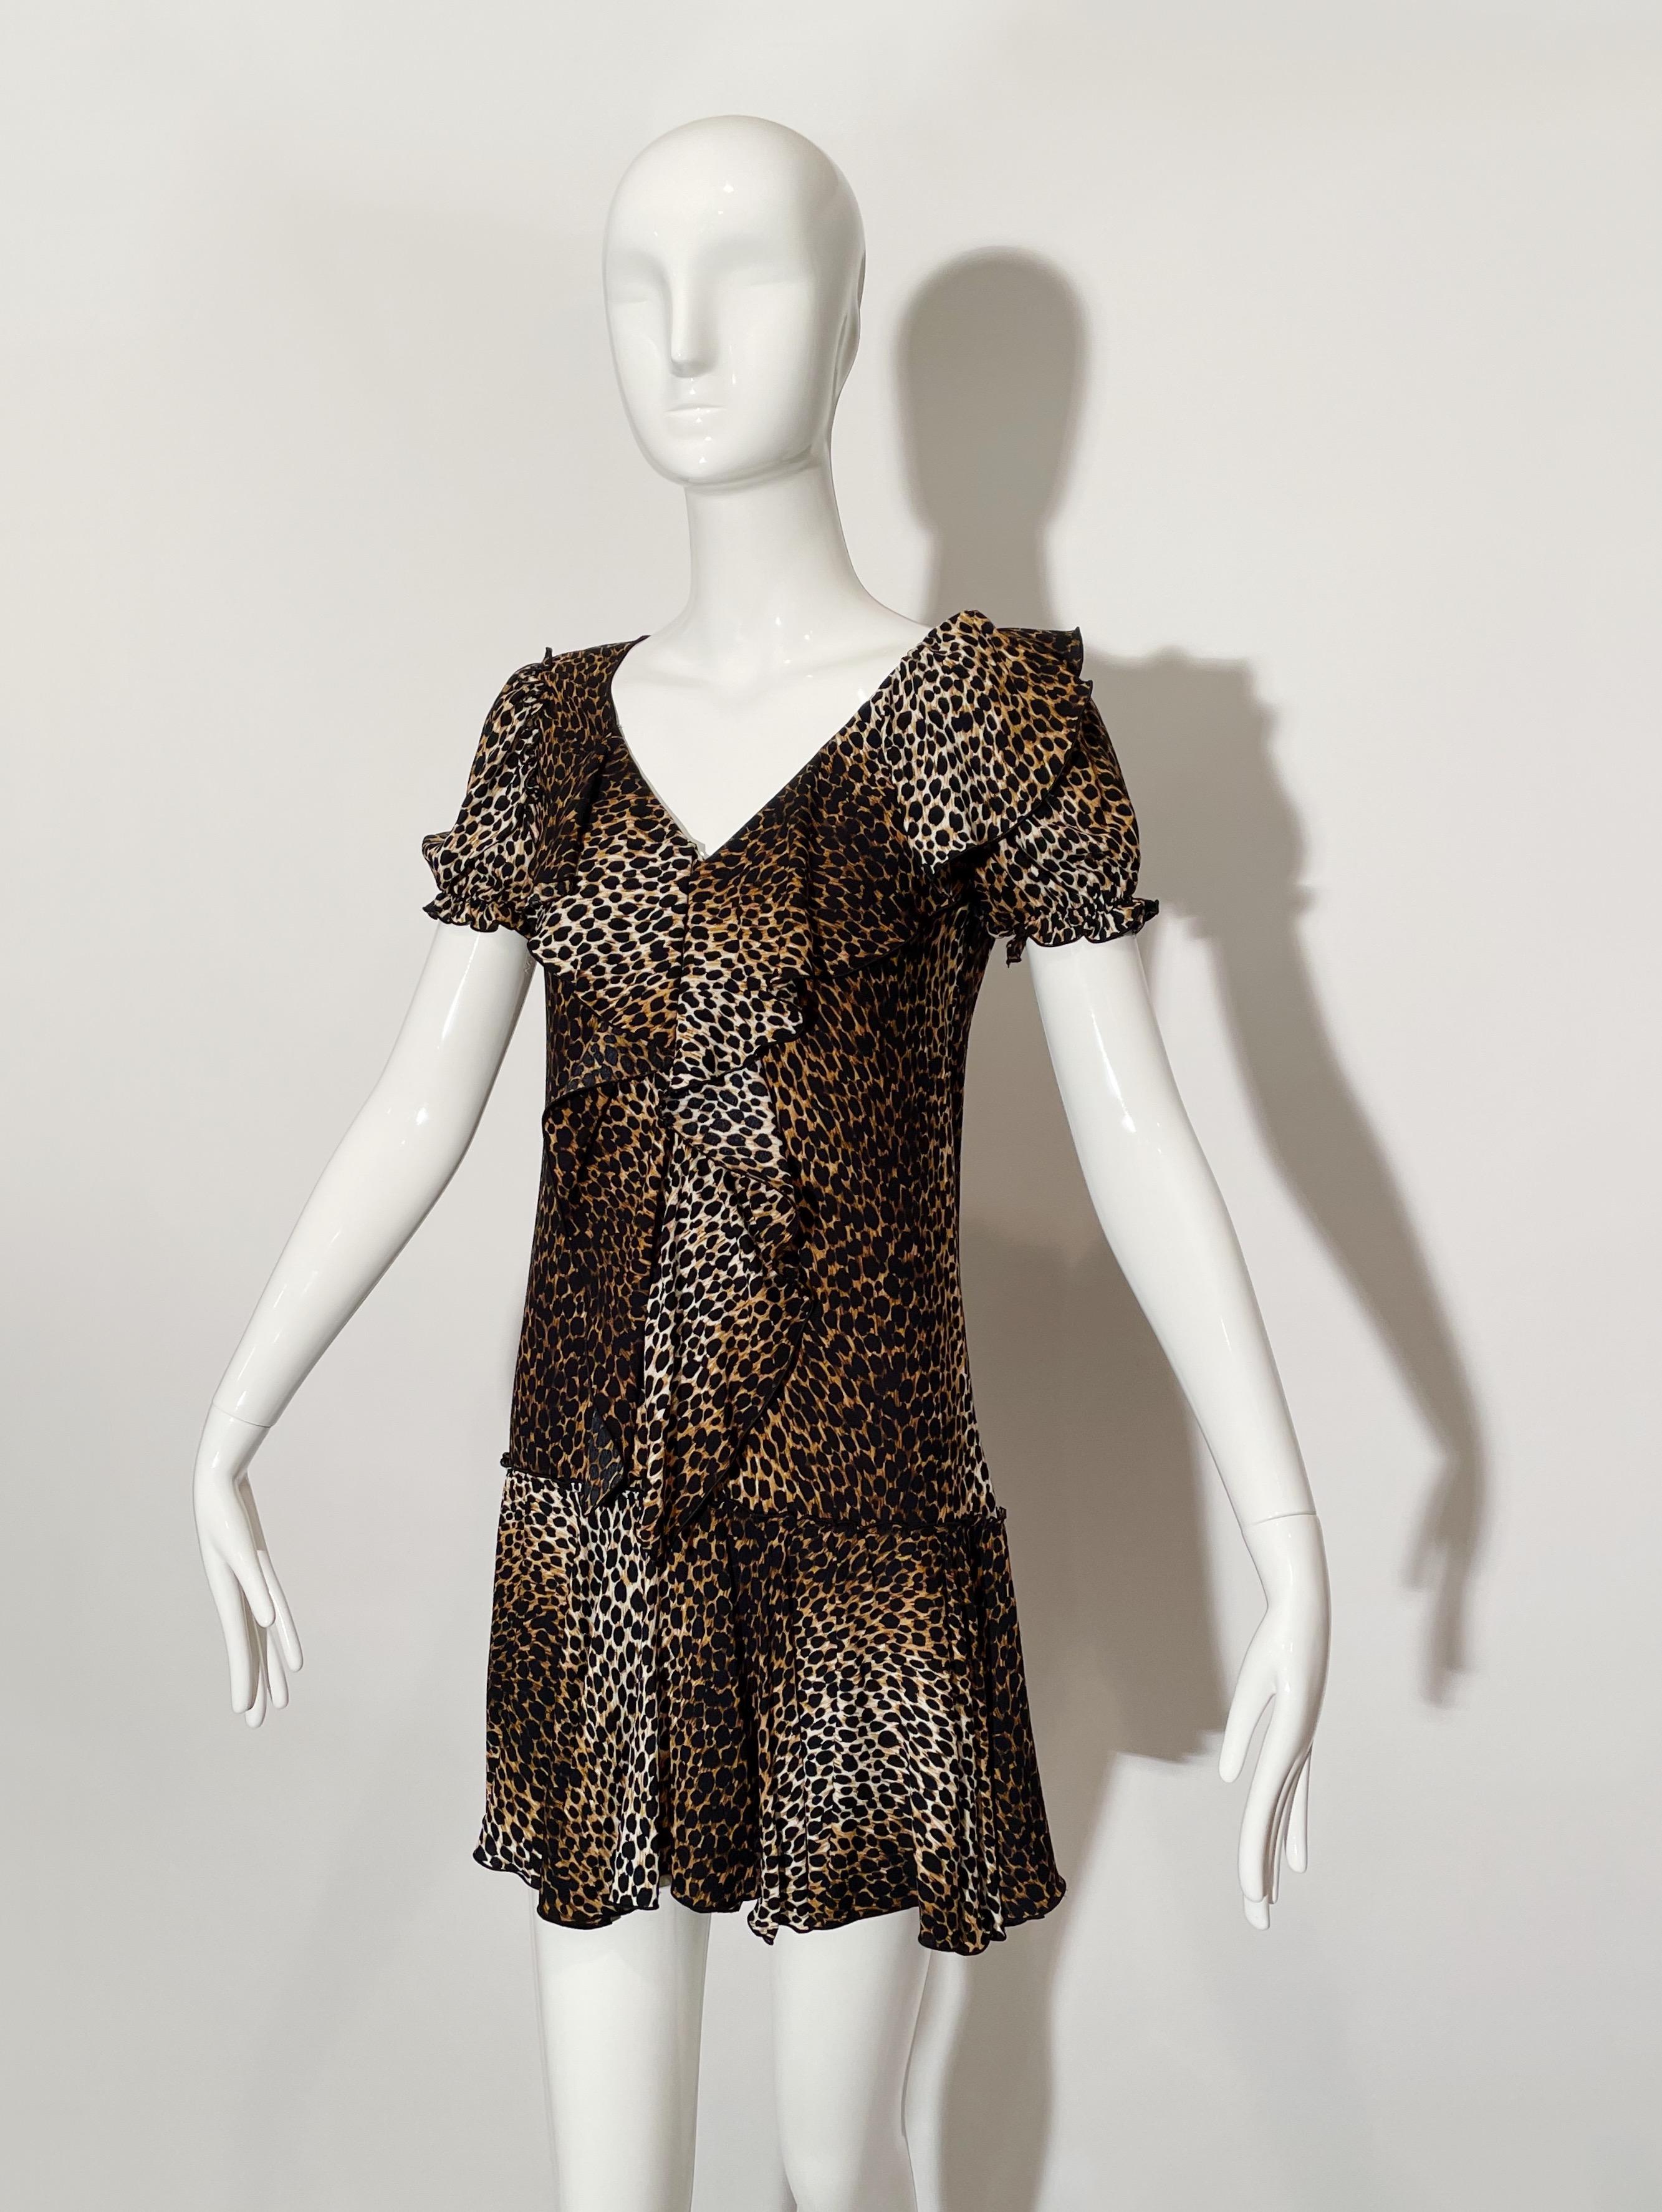 Leopard print mini dress. Puffed Sleeves. Front ruffle detail. Drop waist. Back zipper closure. Viscose. Made in Italy.

*Condition: excellent vintage condition. No visible flaws.


Measurements Taken Laying Flat (inches)—

Shoulder to Shoulder: 15